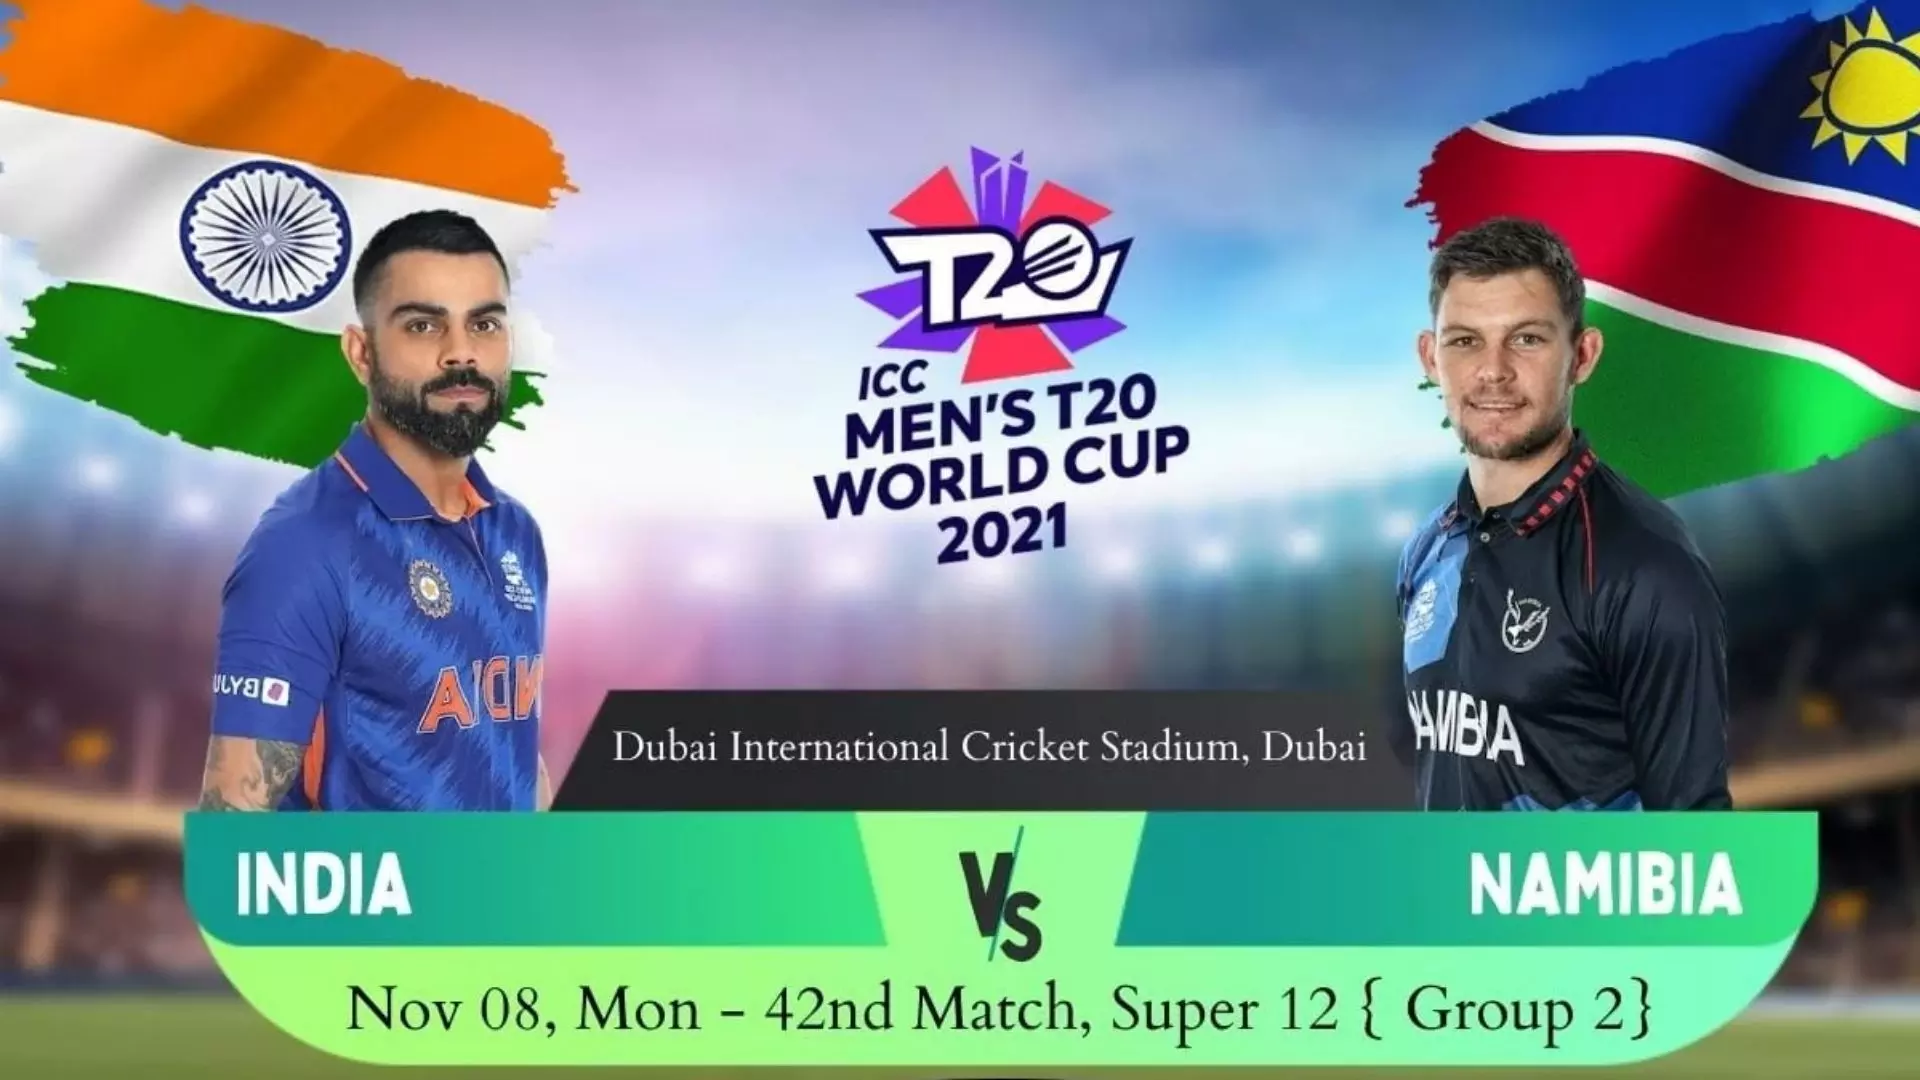 T20 World Cup 2021 India Vs Namibia Match Preview Today 8th November 2021 - Cricket News